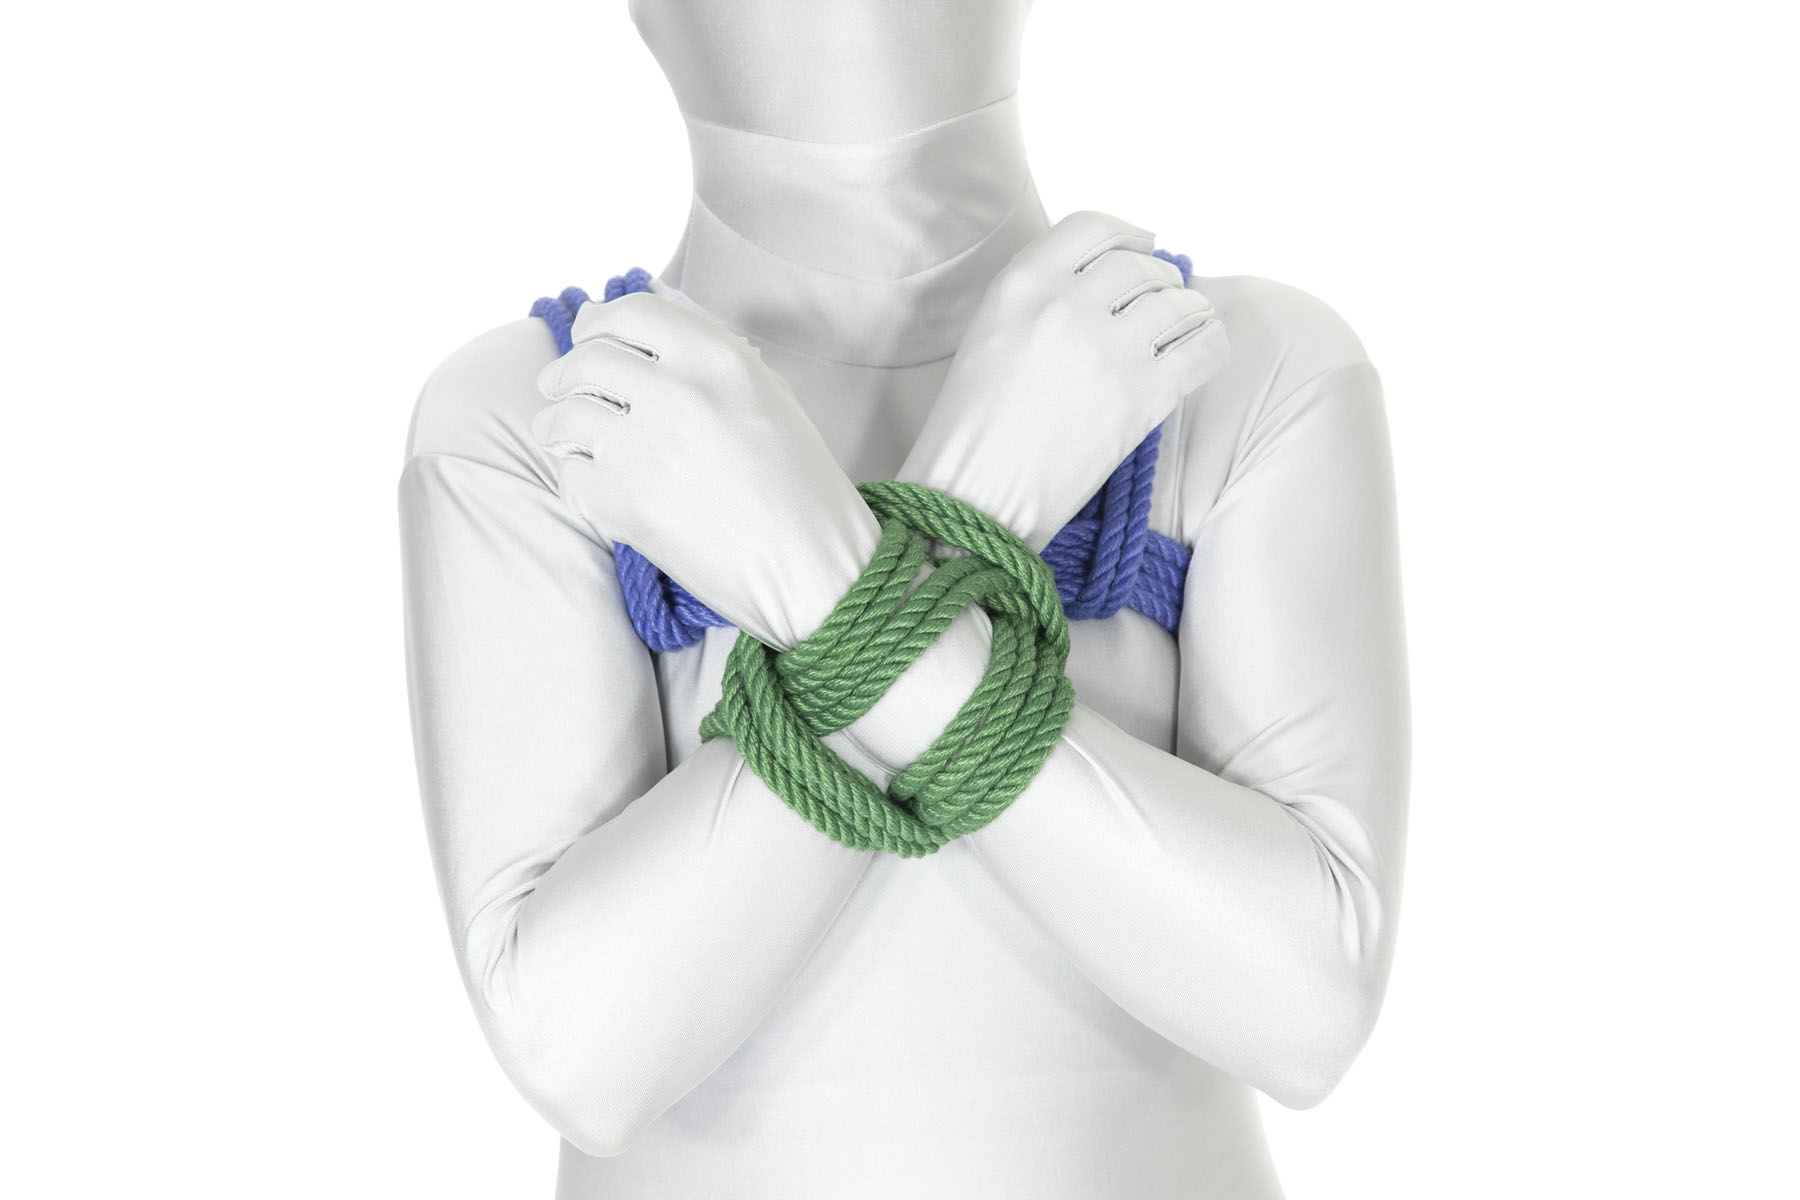 A person in a white bodysuit wearing a blue chest harness. Their arms are crossed at the wrists right over the breastbone. A square lashing in green rope binds their wrists together.